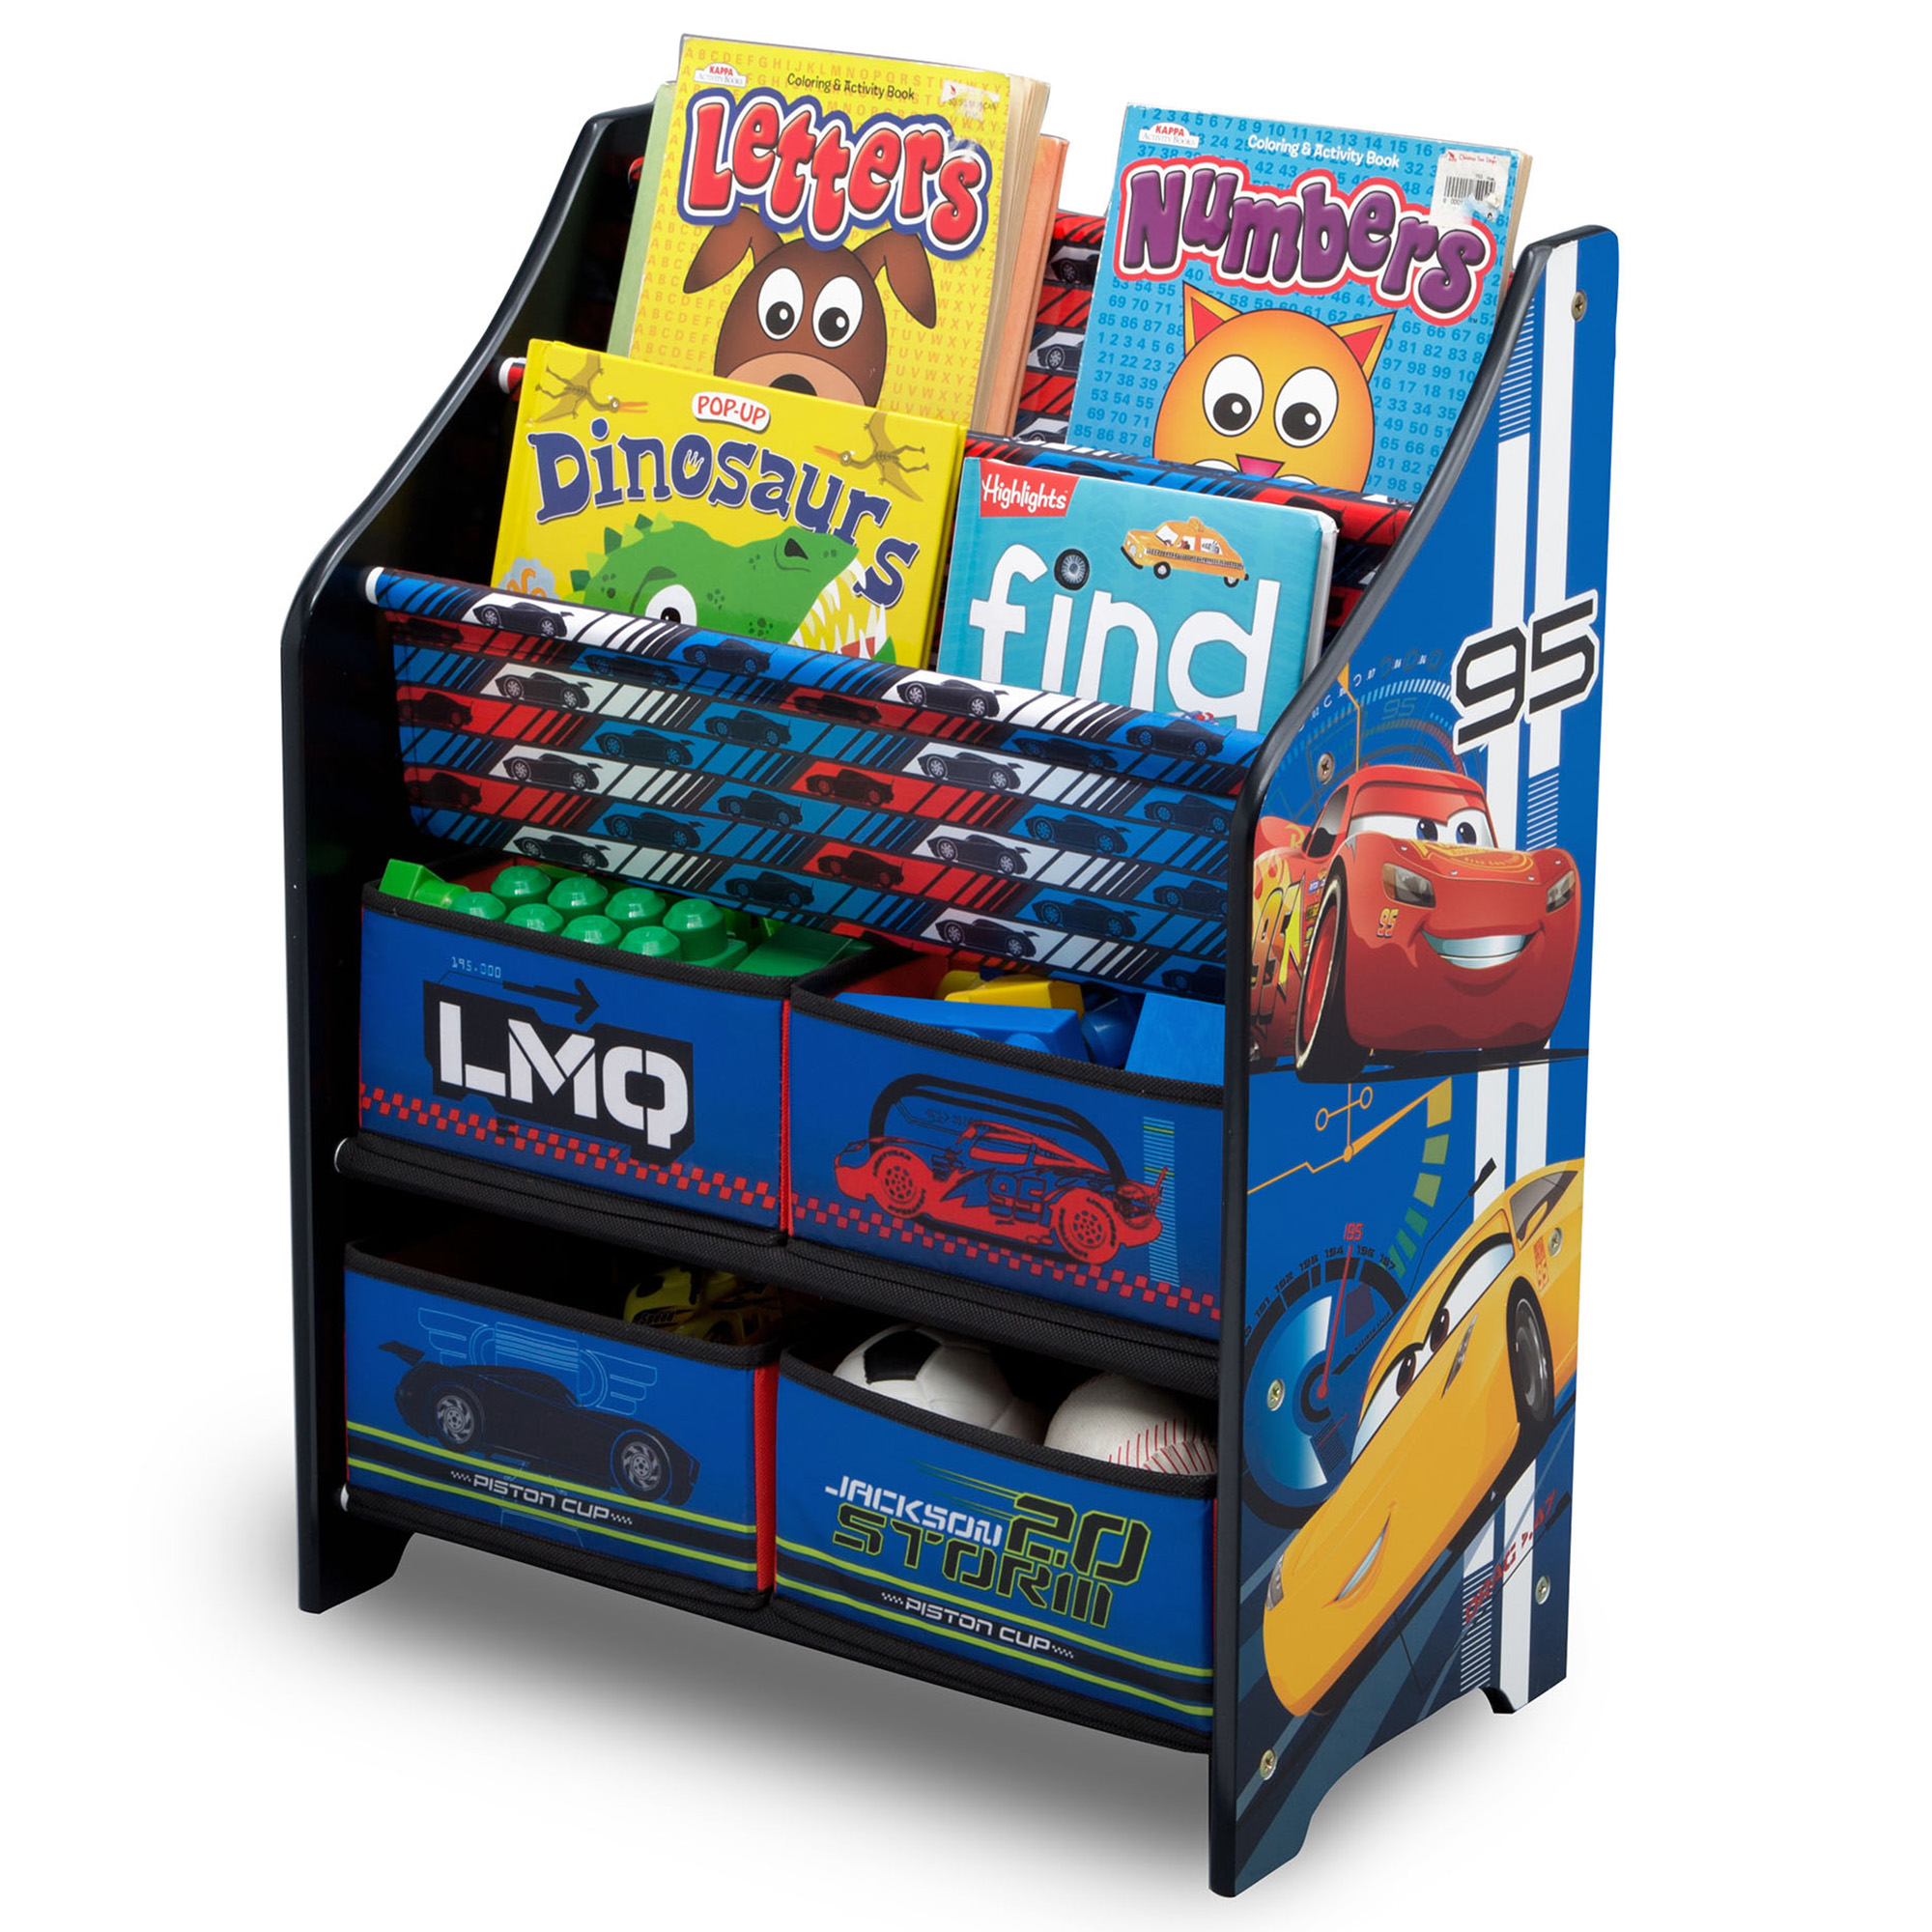 Disney/Pixar Cars Book and Toy Organizer for Kids/Toddlers by Delta Children, Greenguard Gold Certified - image 5 of 5